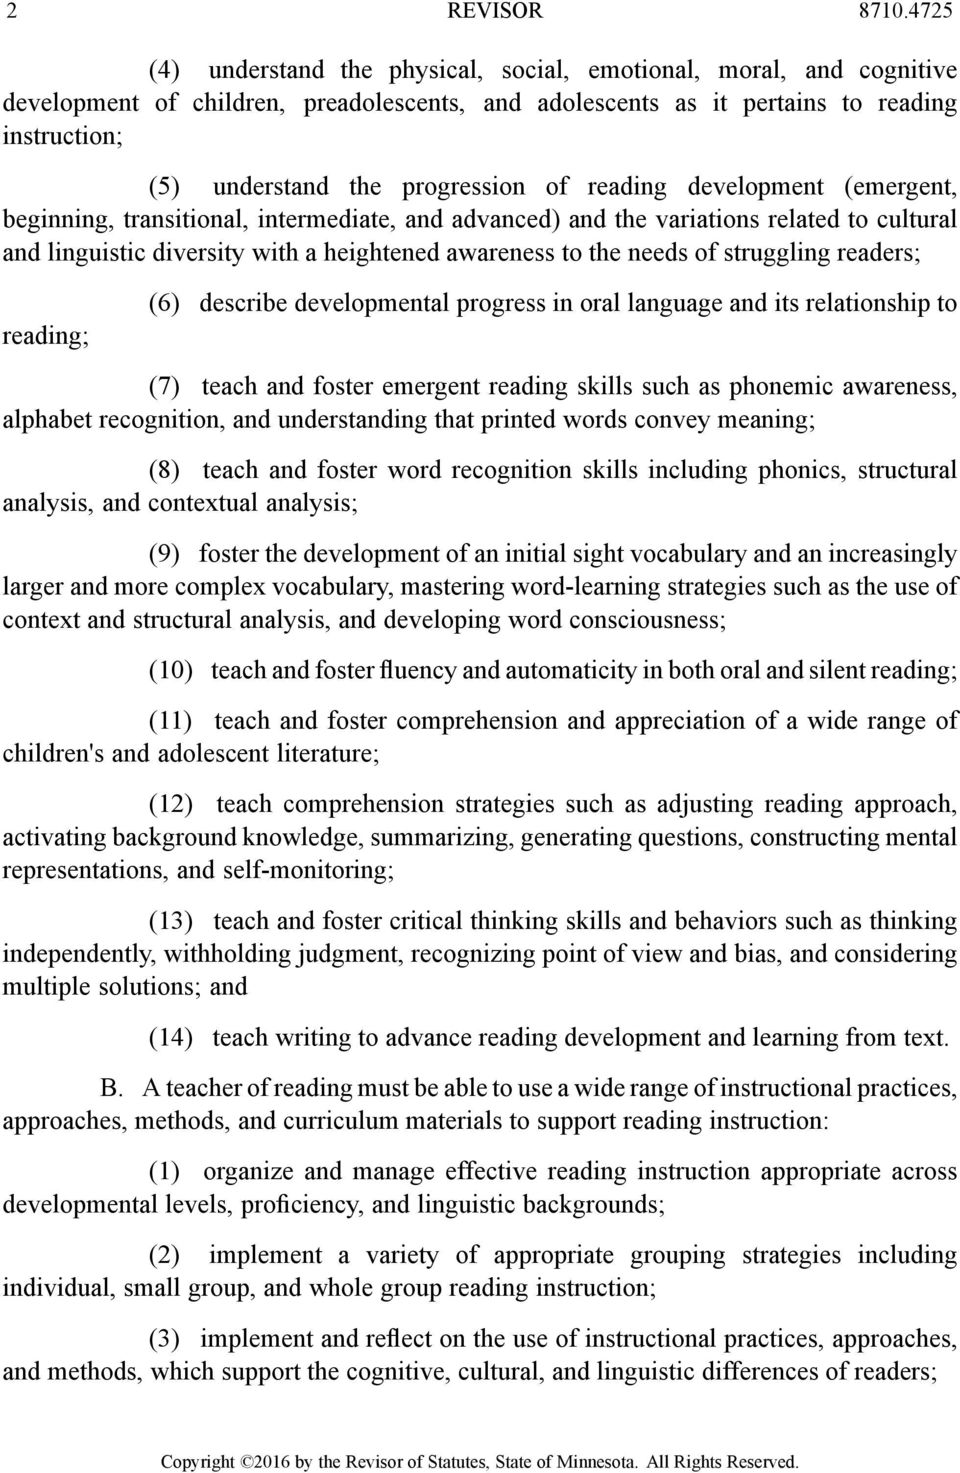 progression of reading development (emergent, beginning, transitional, intermediate, and advanced) and the variations related to cultural and linguistic diversity with a heightened awareness to the